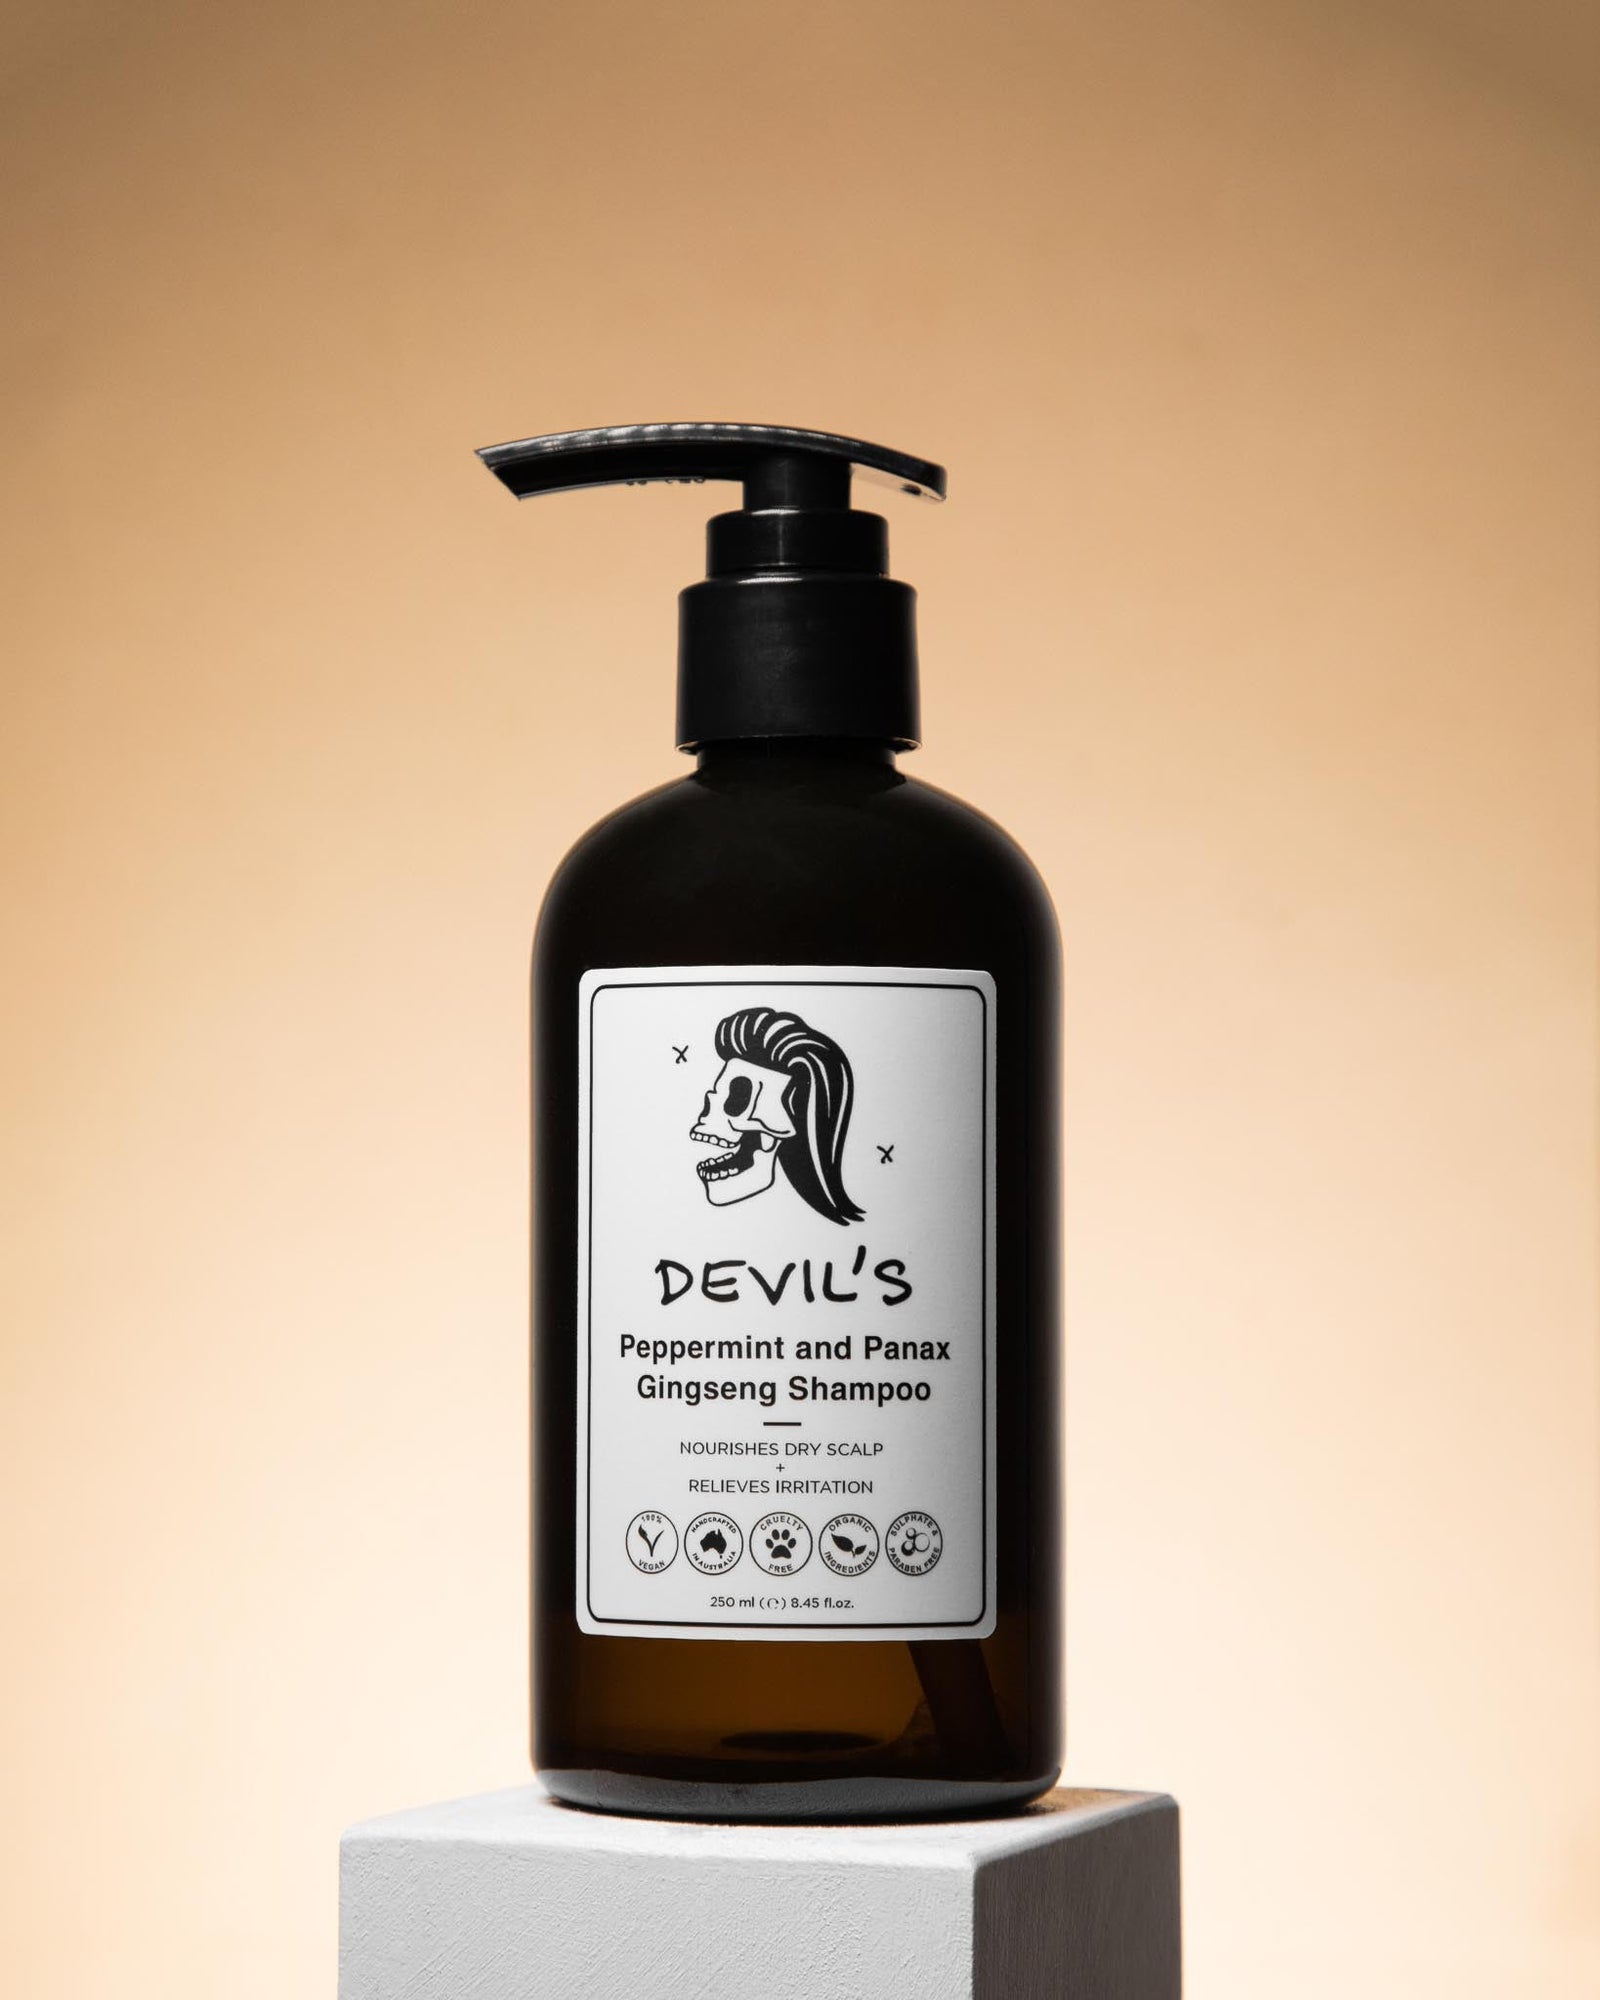 MEN'S ITCHY SCALP - PEPPERMINT AND PANAX GINGSENG SHAMPOO-Devil's Dandruff-stride